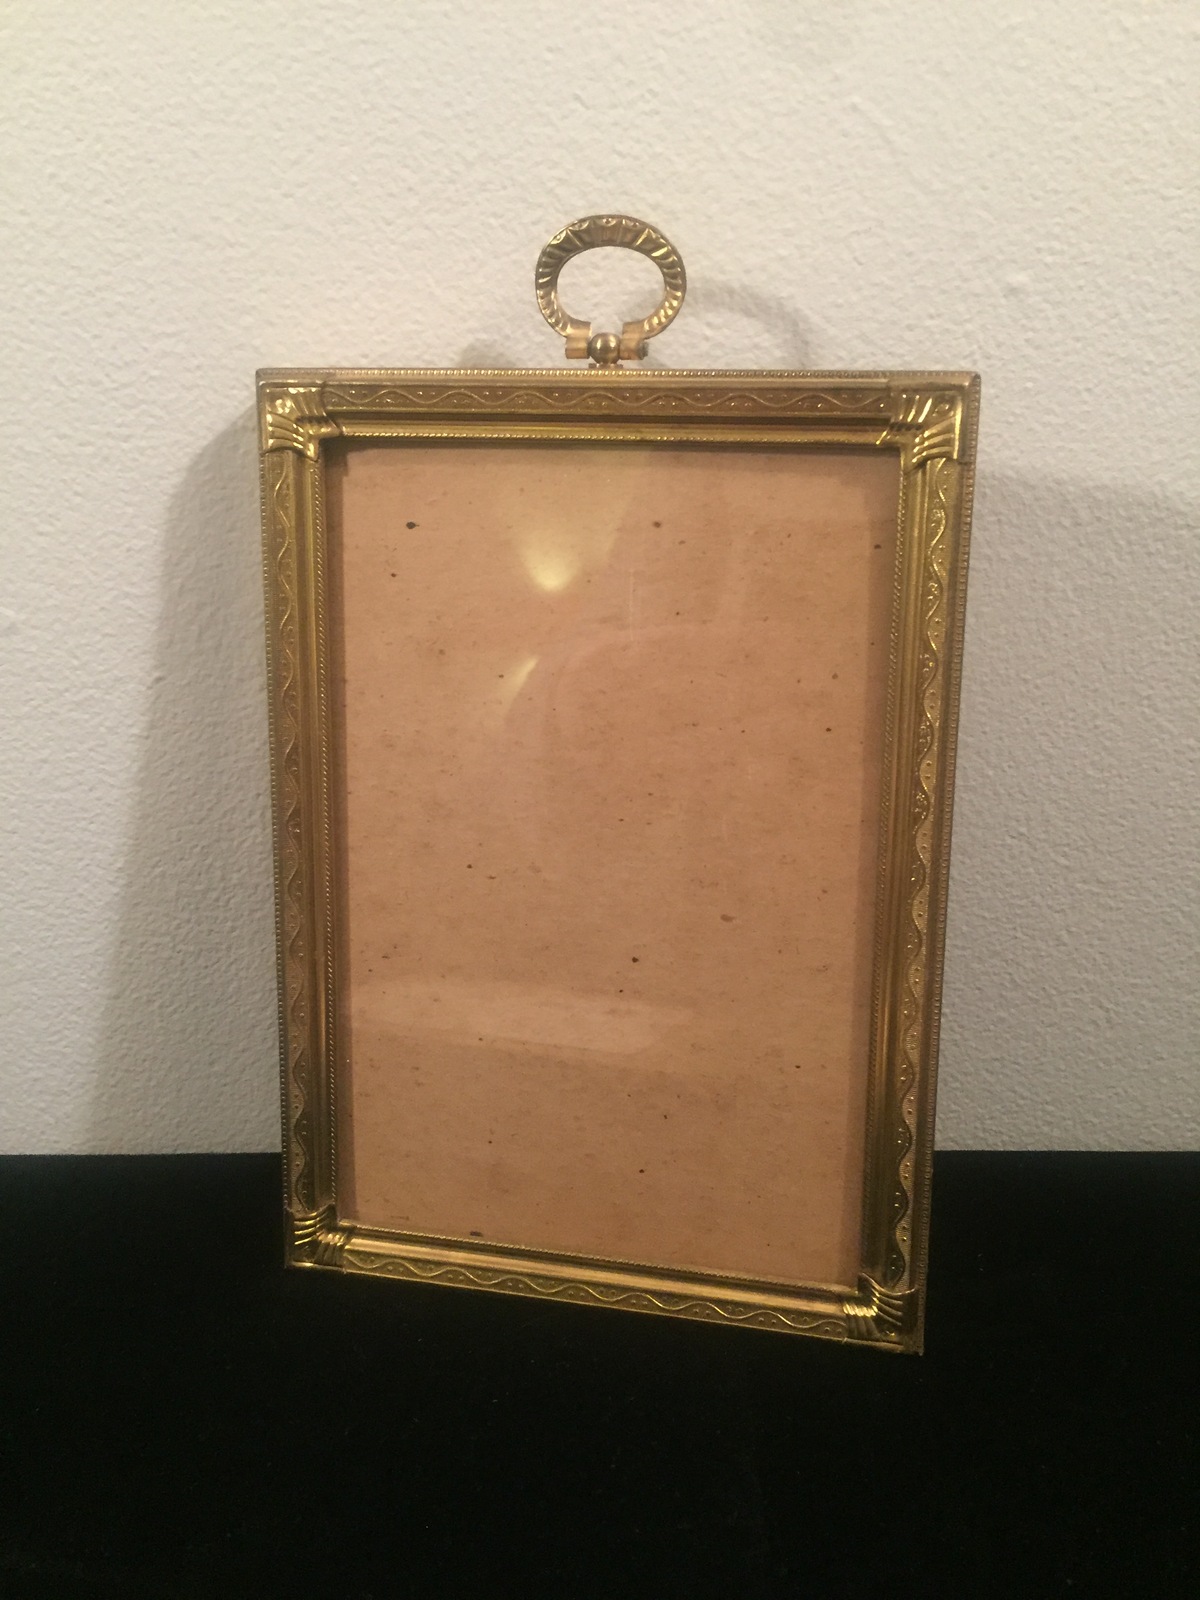 Primary image for Vintage 40s gold ornate 5" x 7" frame with top hanging circle design